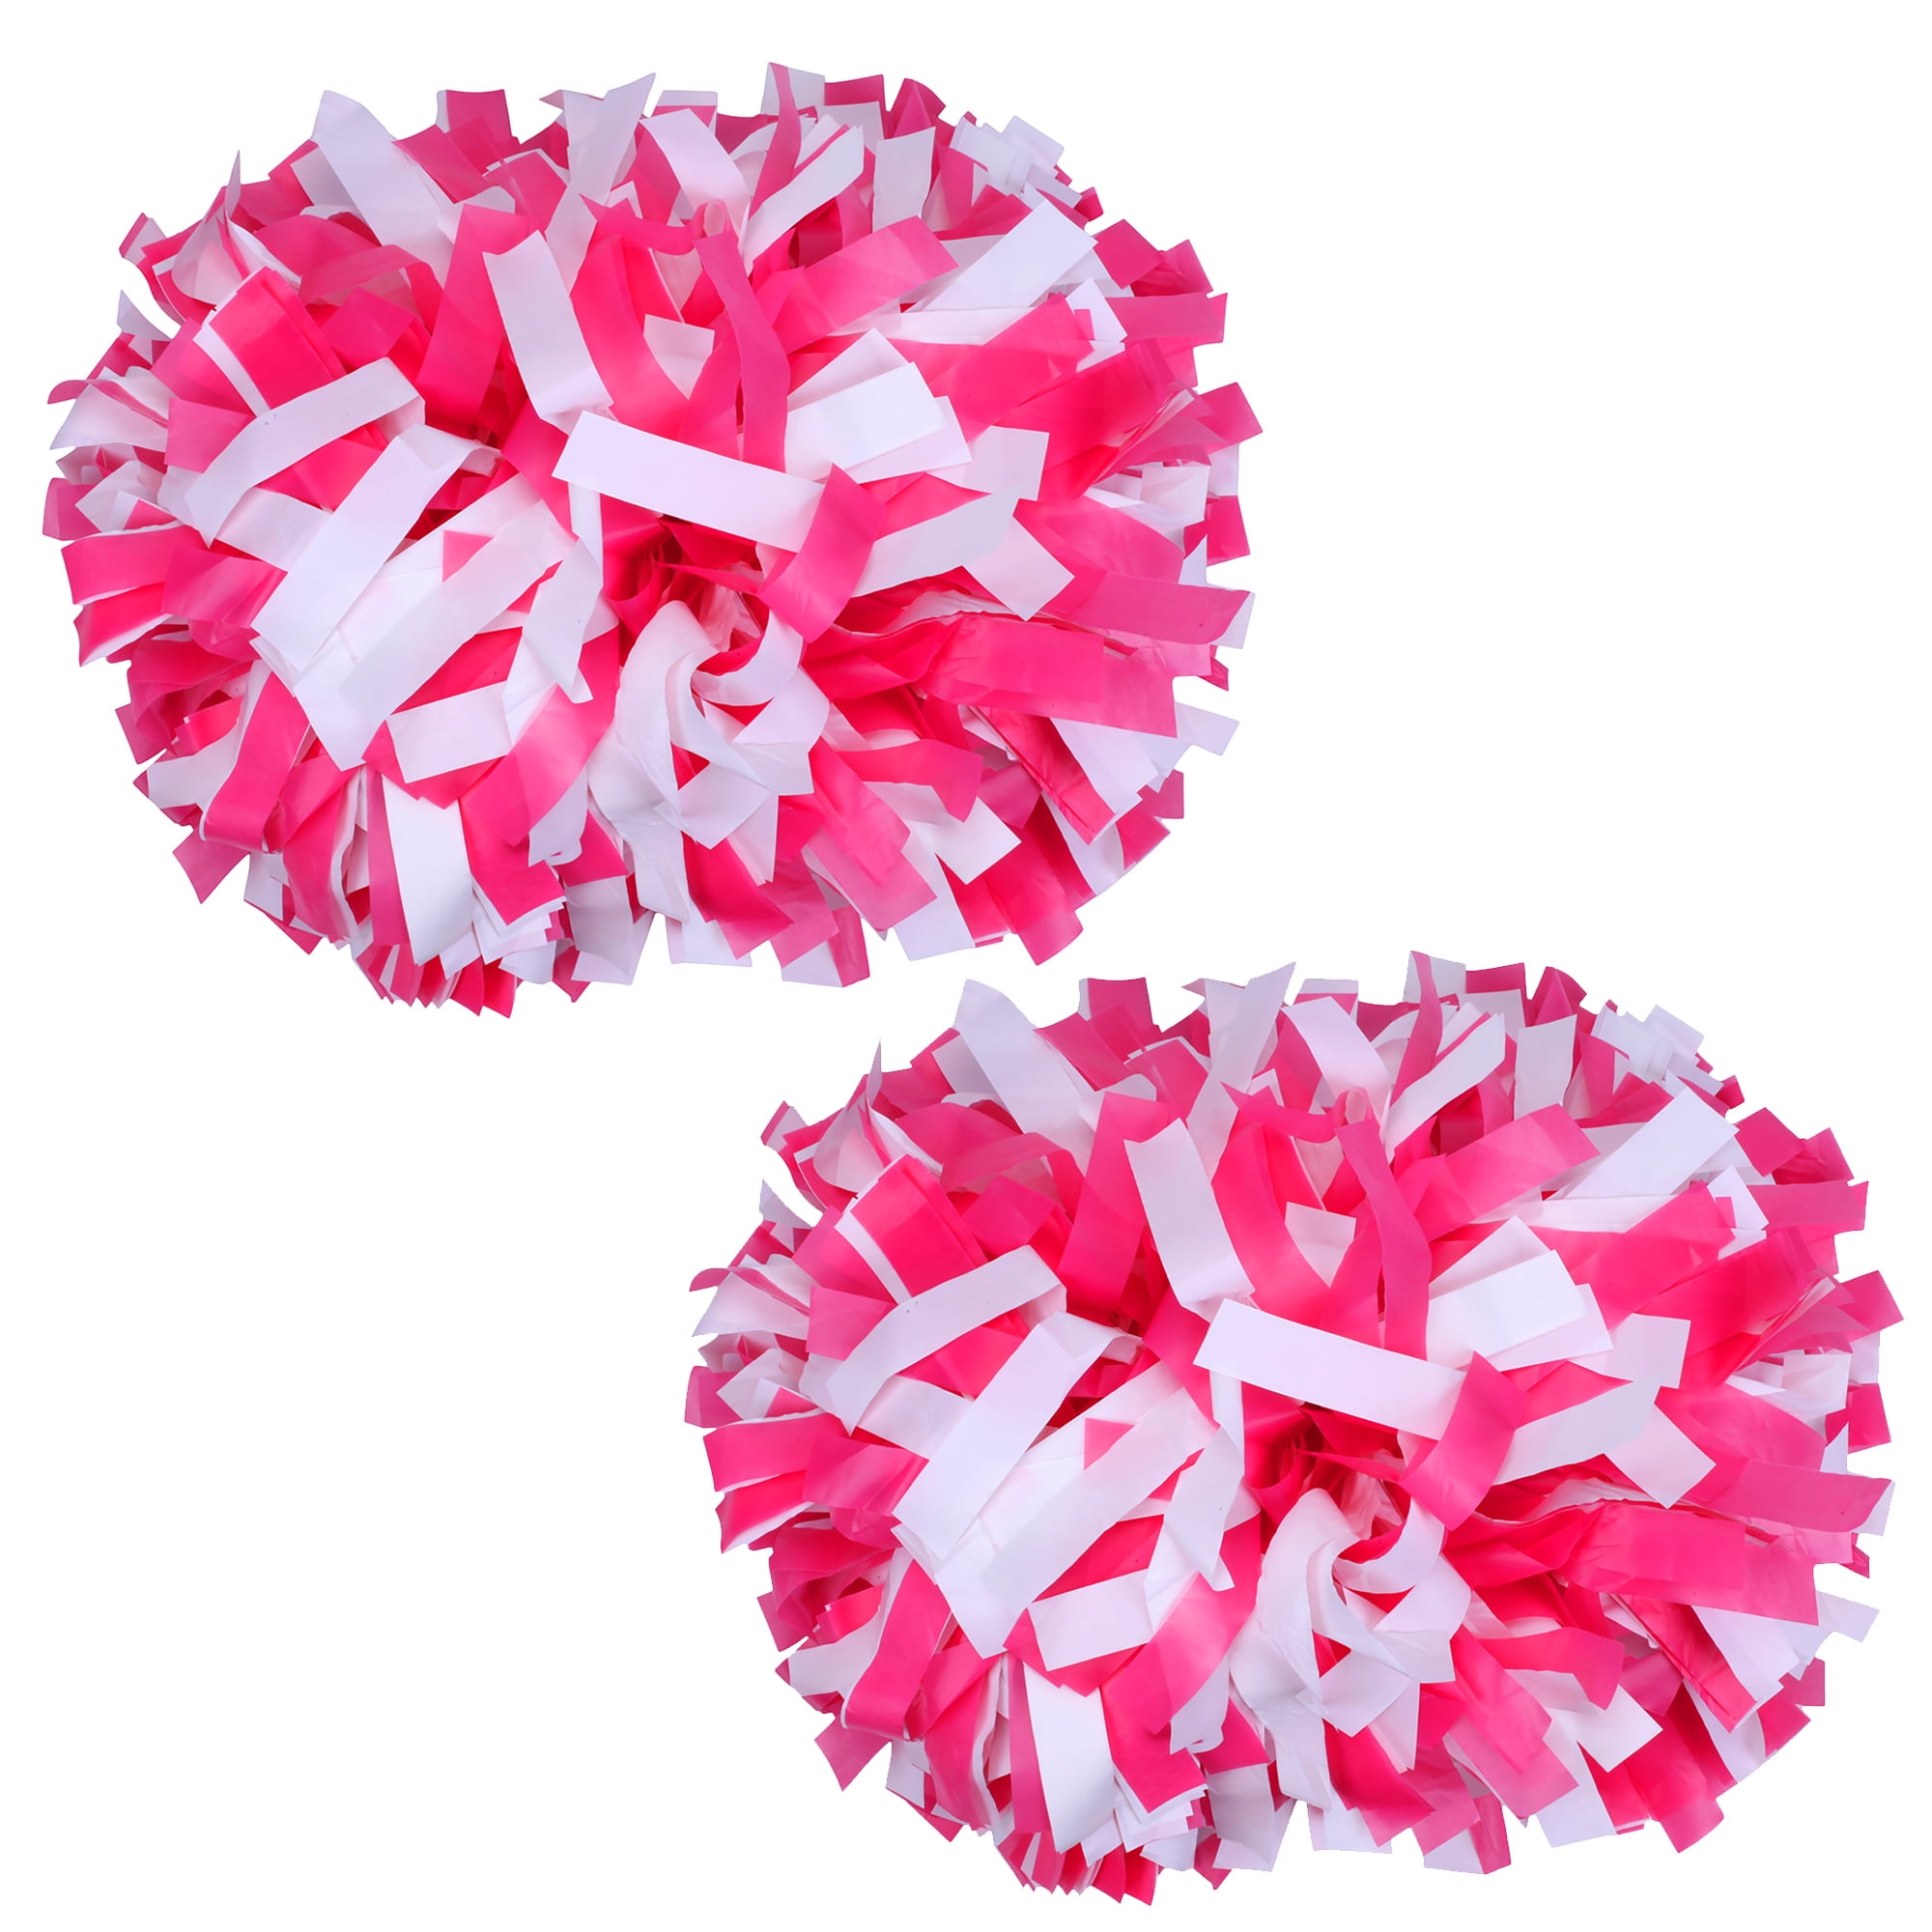 Danzcue Shocking Hot Pink Plastic Poms - One Pair [DQCPD01-SHKHPK-2] -  $18.99